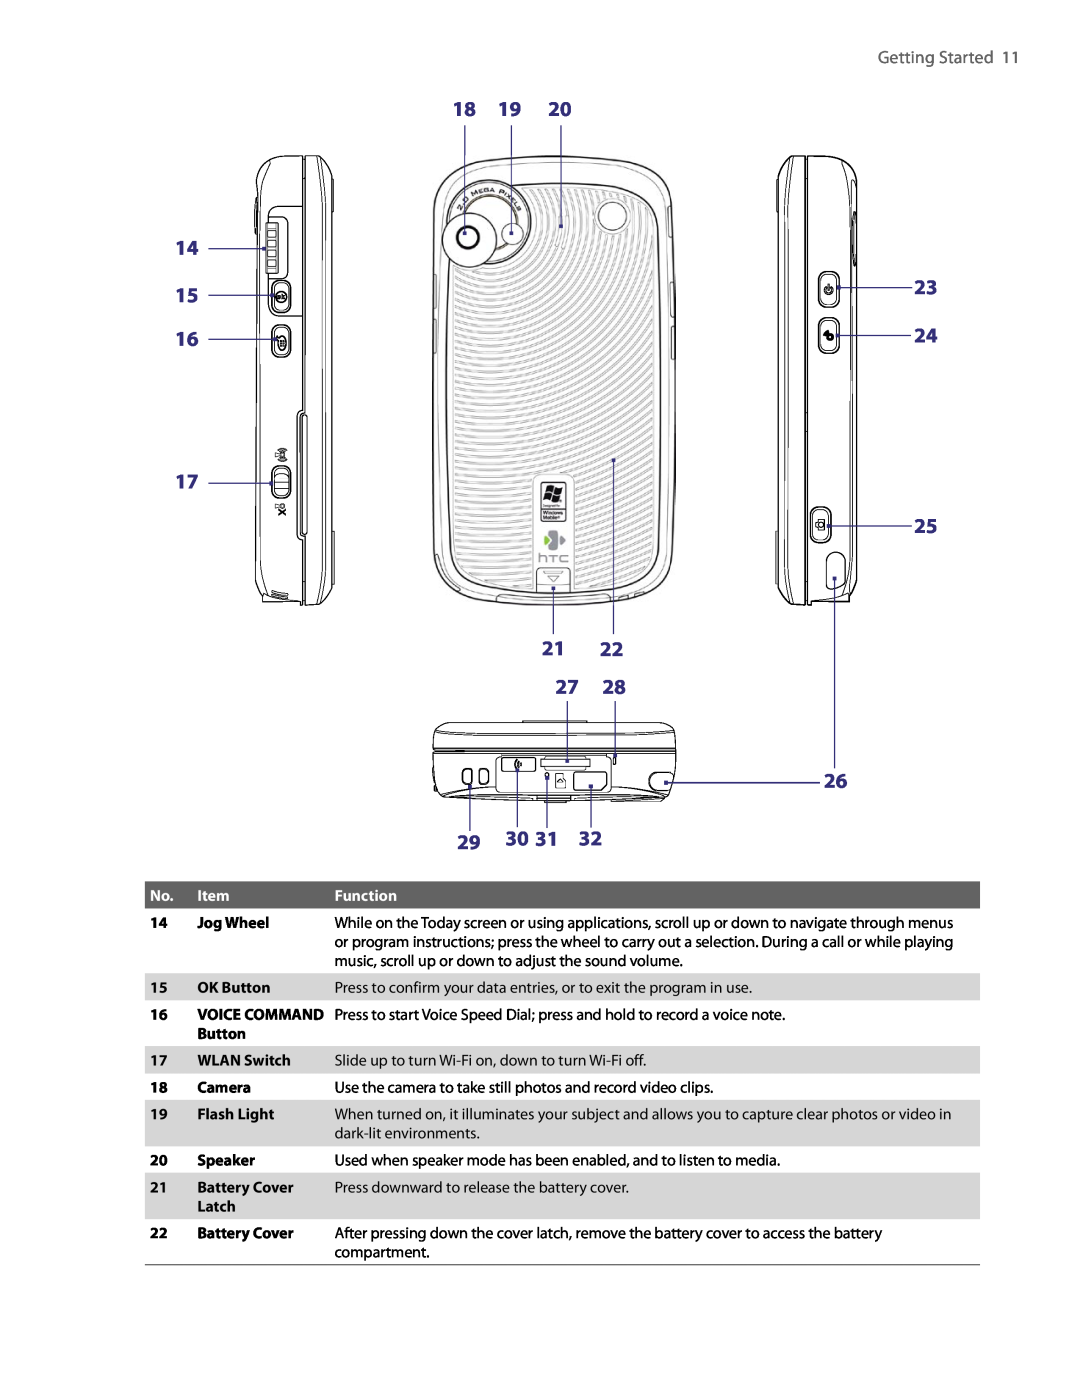 HTC PDA Phone user manual 18 19, 29 30 31, Getting Started, Function 